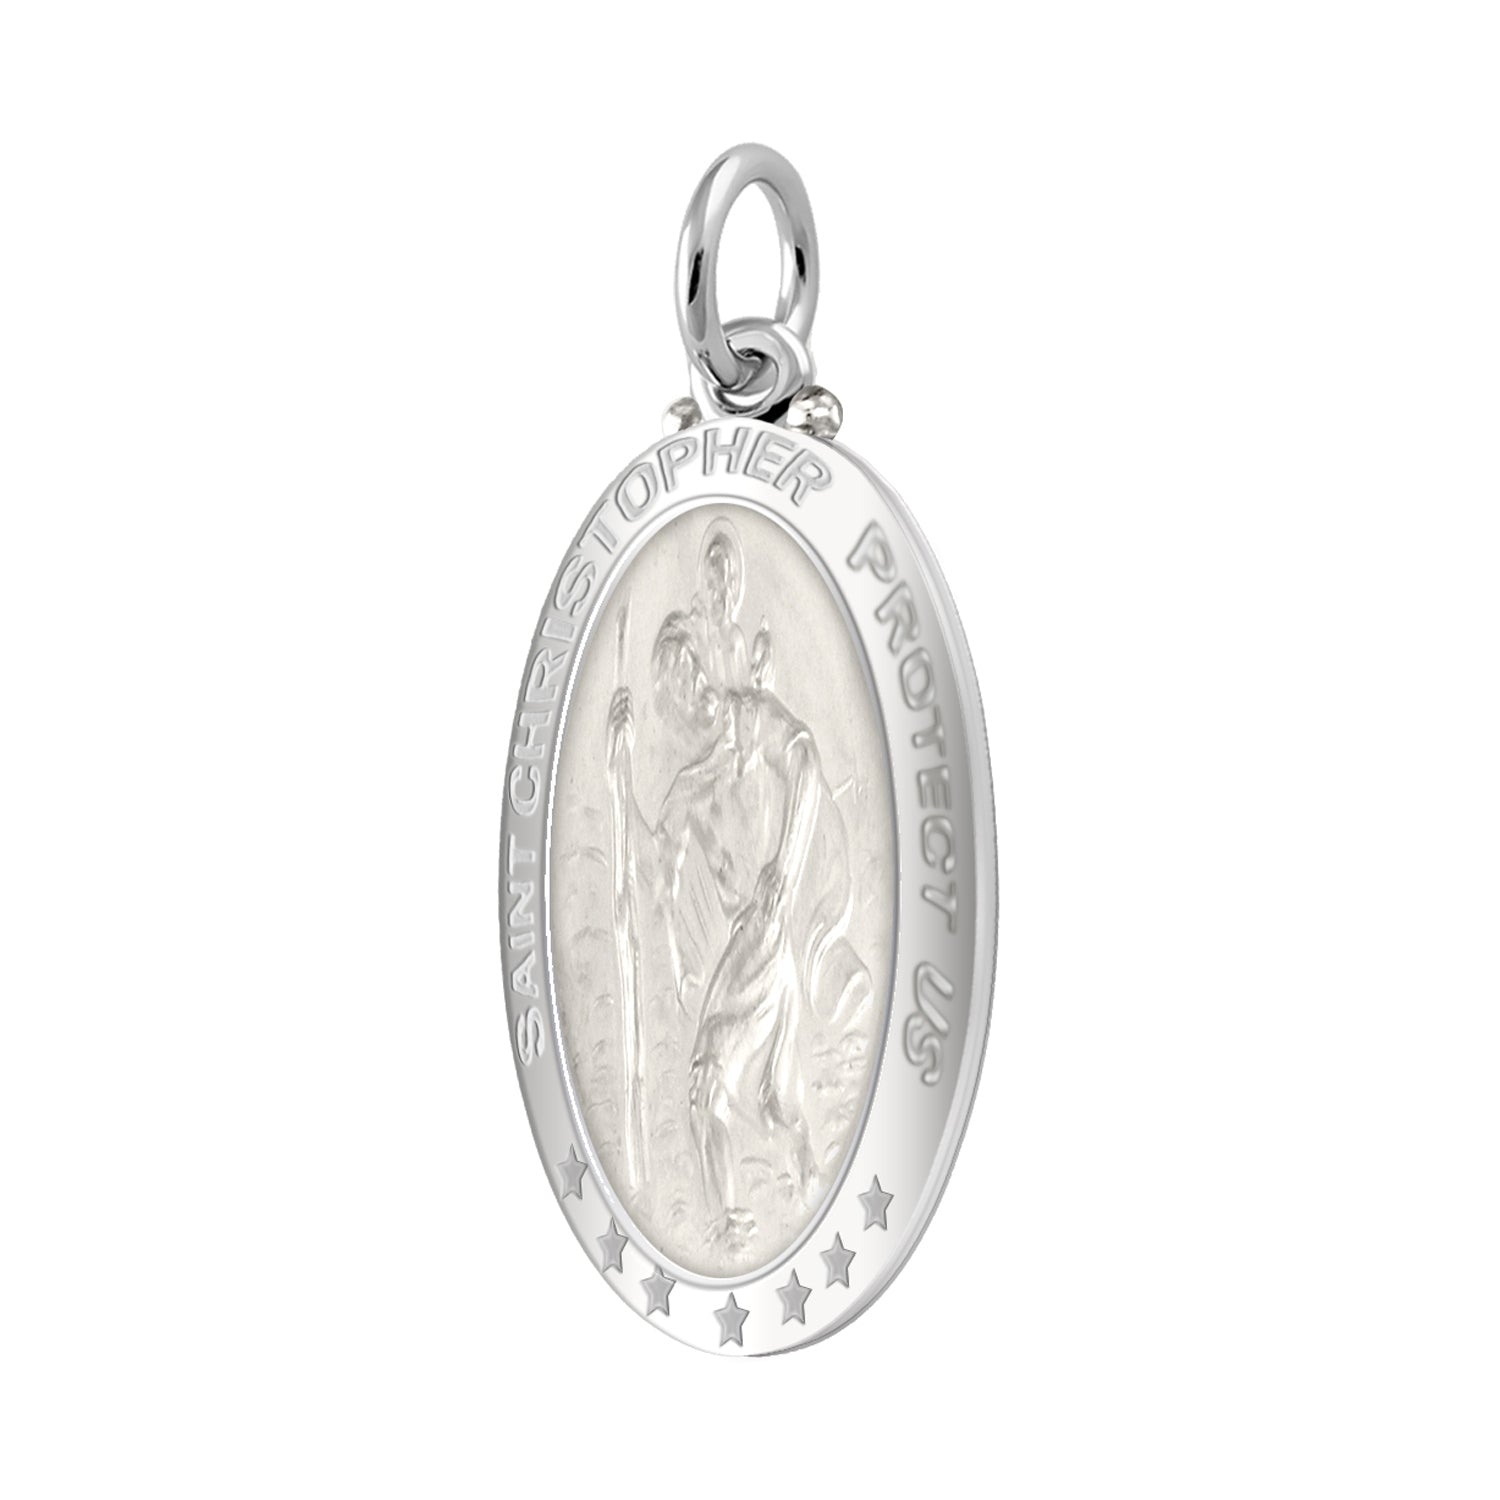 The Saint Christopher Protect US Oval Sterling Silver Pendant Necklace